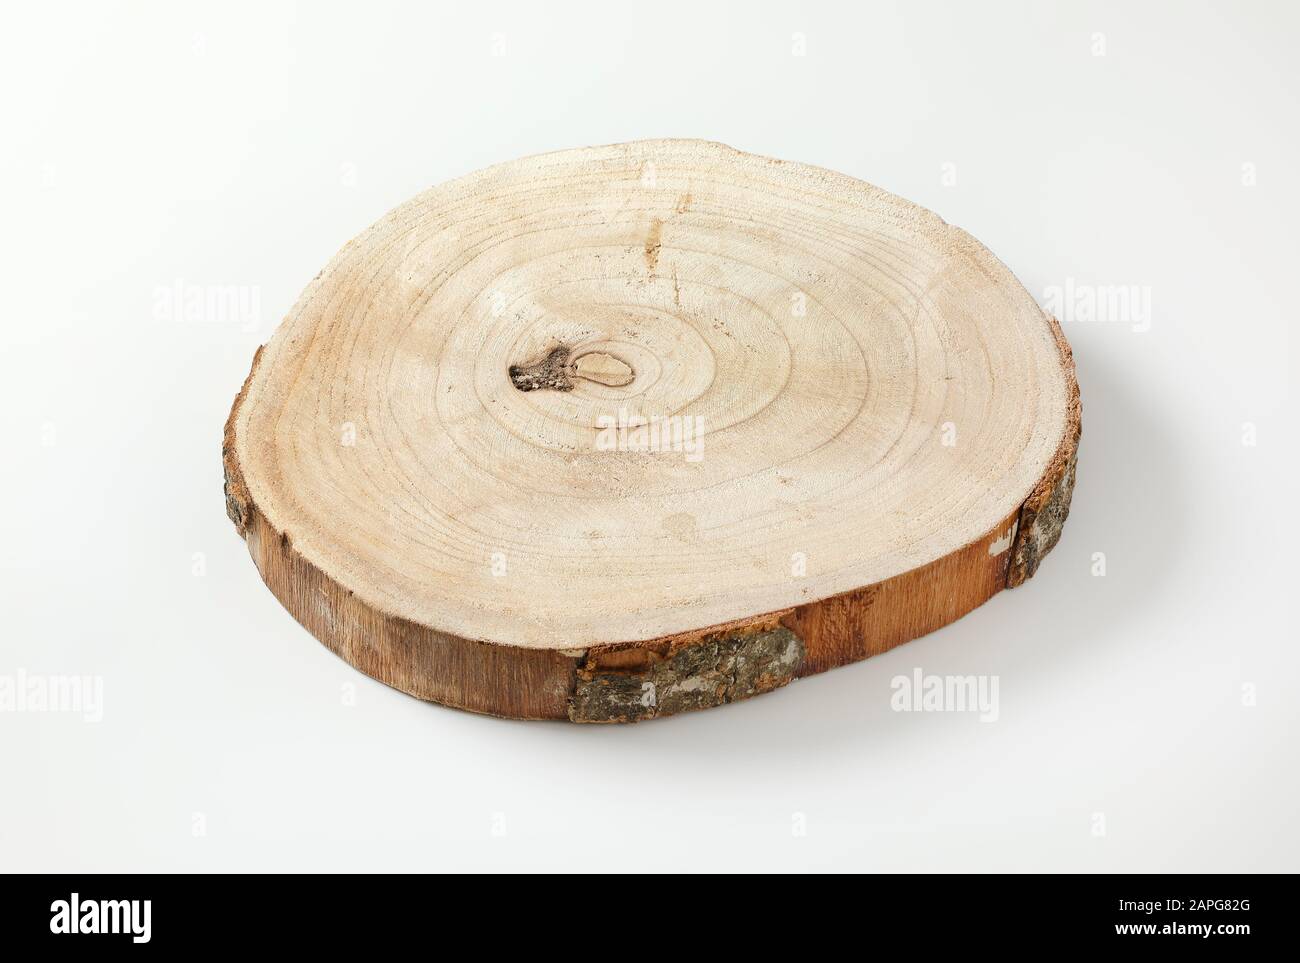 Natural live edge round wood slab with growth rings Stock Photo